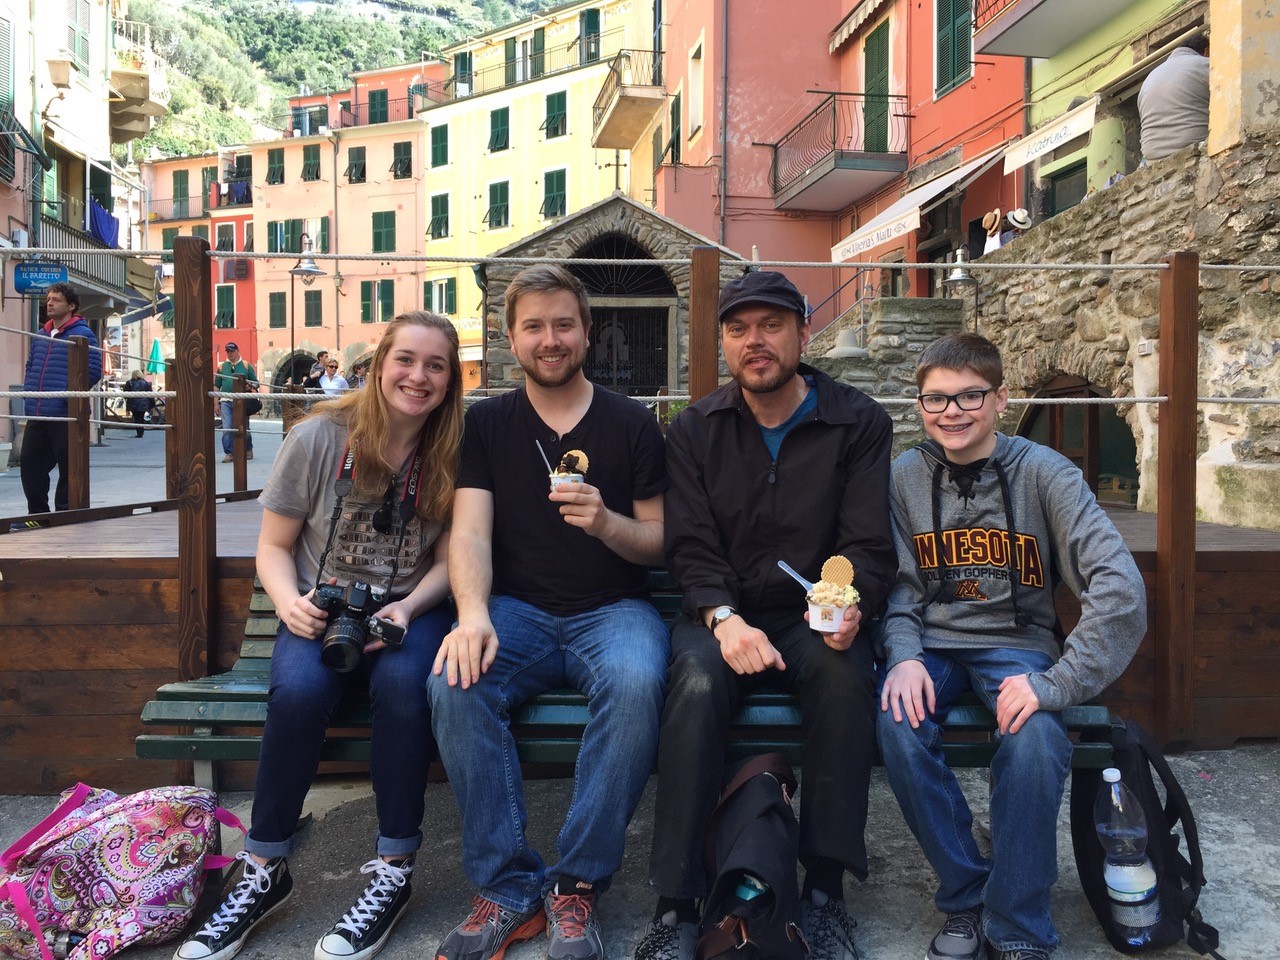 Emily Taylor (10) sits along with her brother, William Taylor (8) and chaperones Tony Johanson and Peter Sunnarborg. “I liked trying new food like escargot, paella and watching Flaminco dancers”, said Johanson. Photo Submitted 